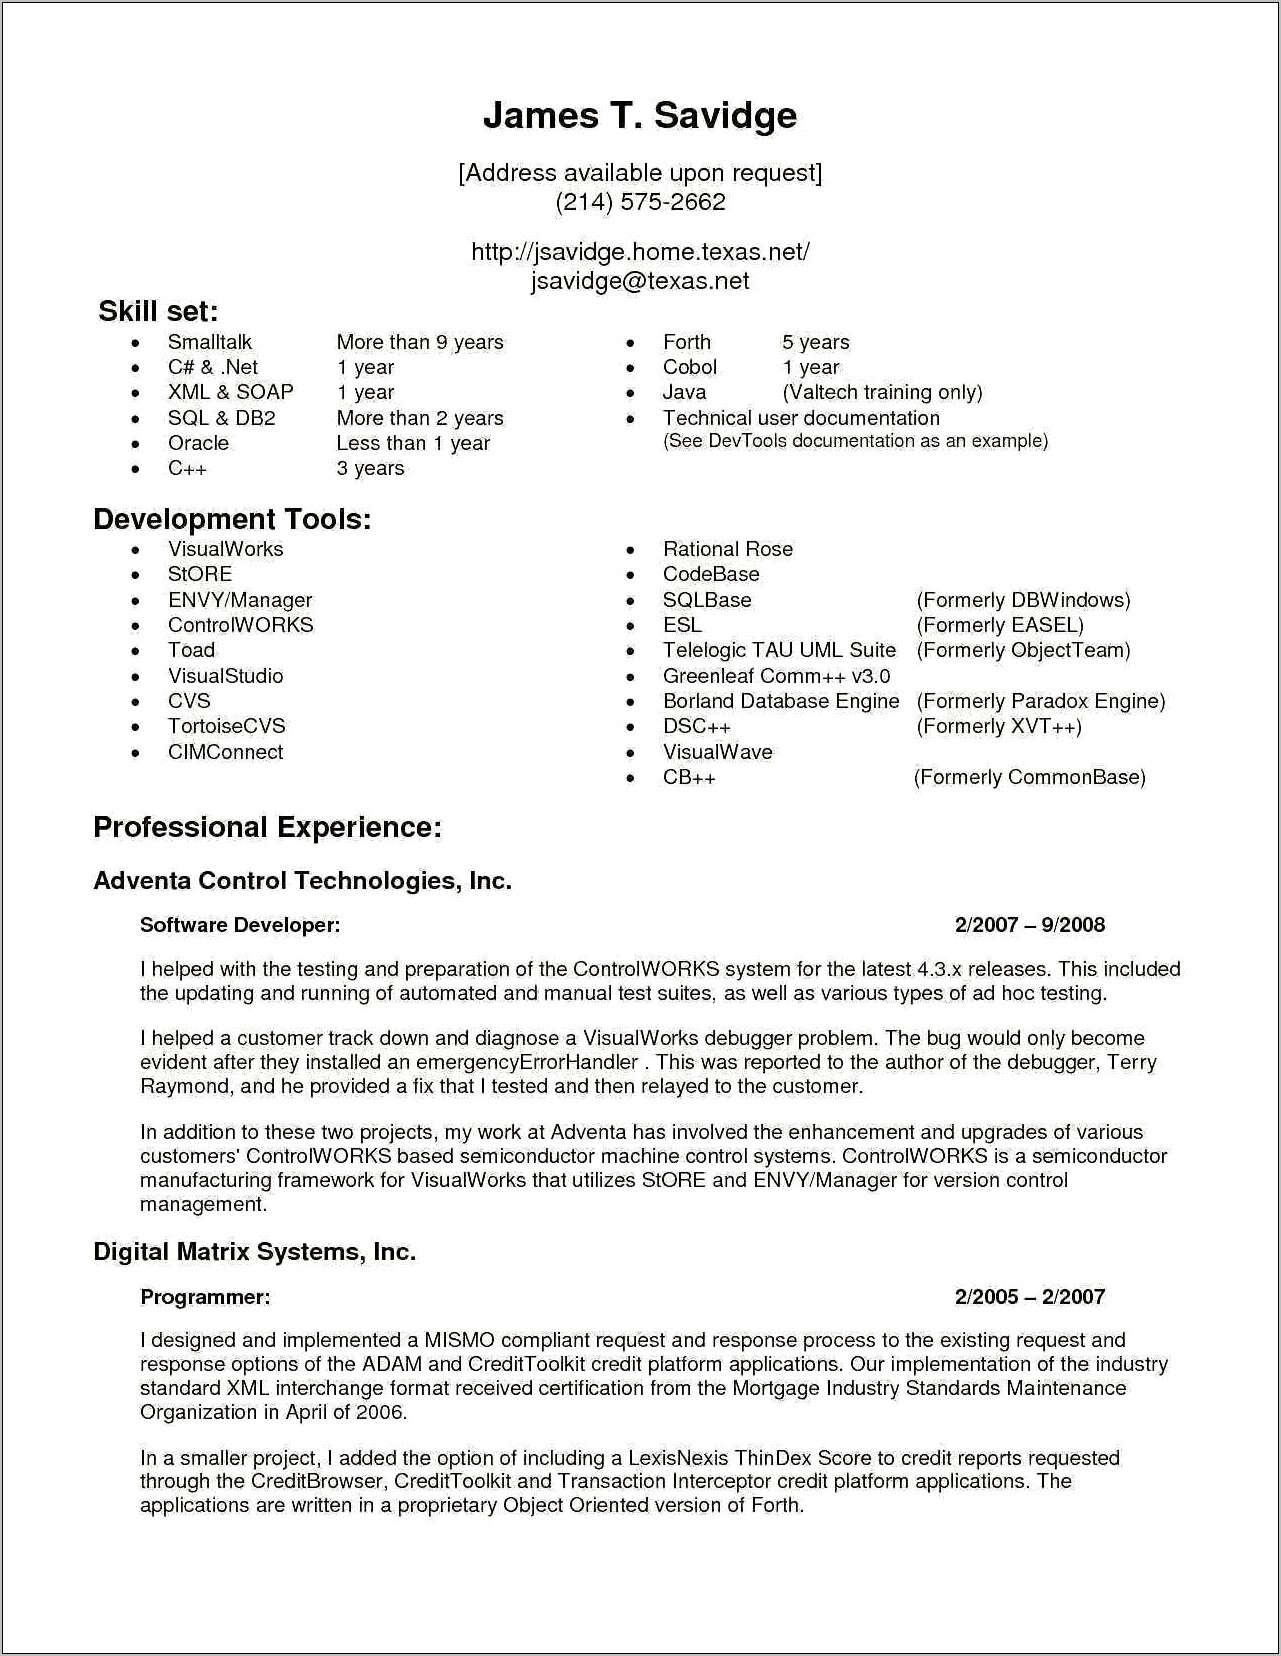 4 Year Experience Resume Format For Developer